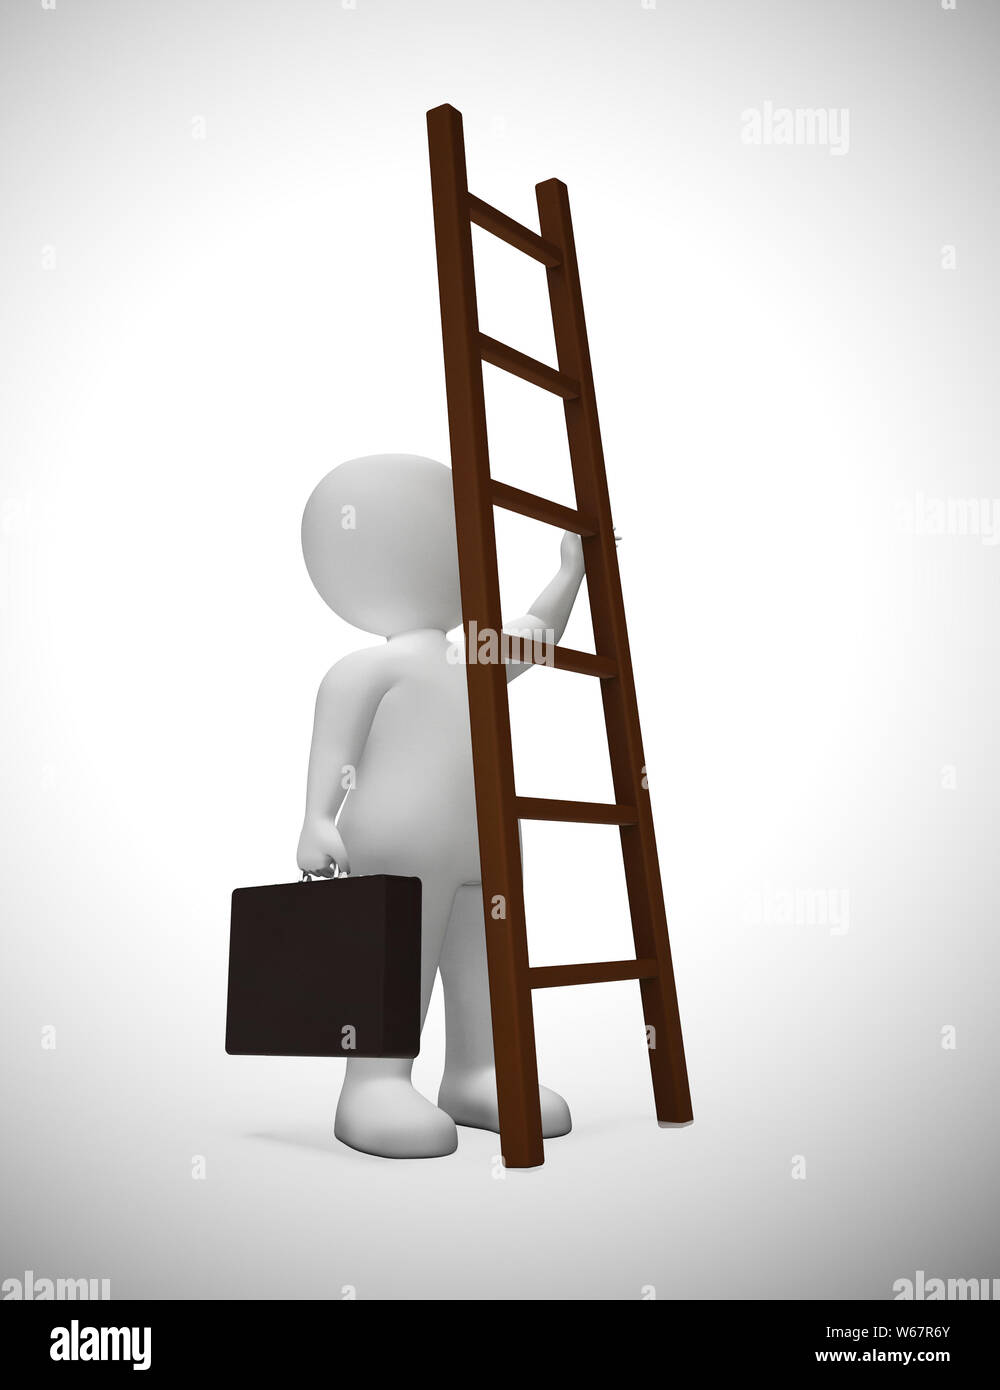 Ladder to success concept icon means ambitious leader desiring goals. Climbing to successful achievement - 3d illustration Stock Photo